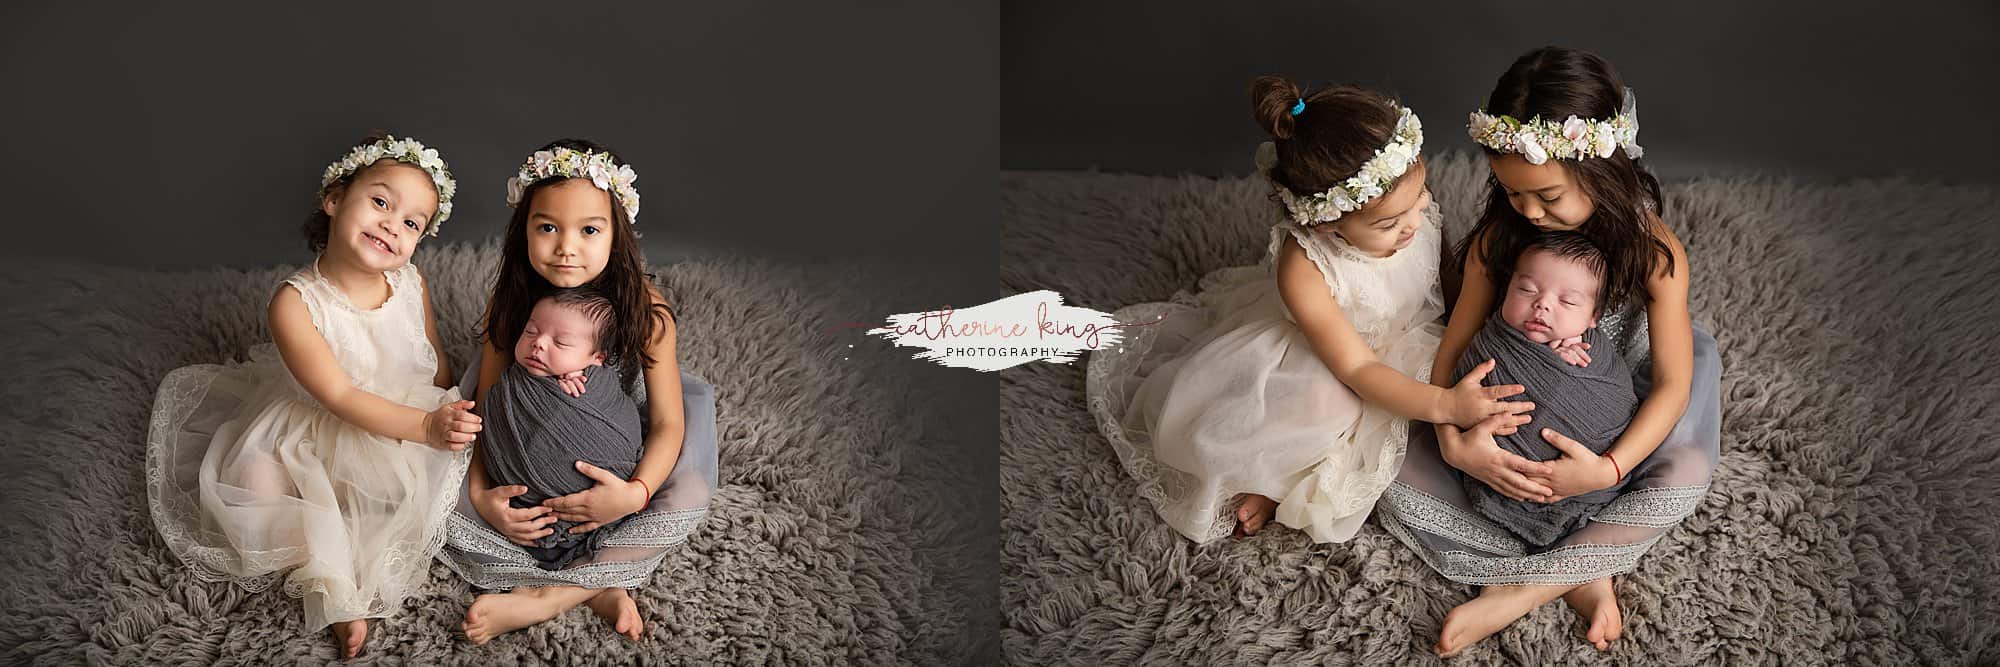 ct newborn photography session with makai 6 days old in madison ct